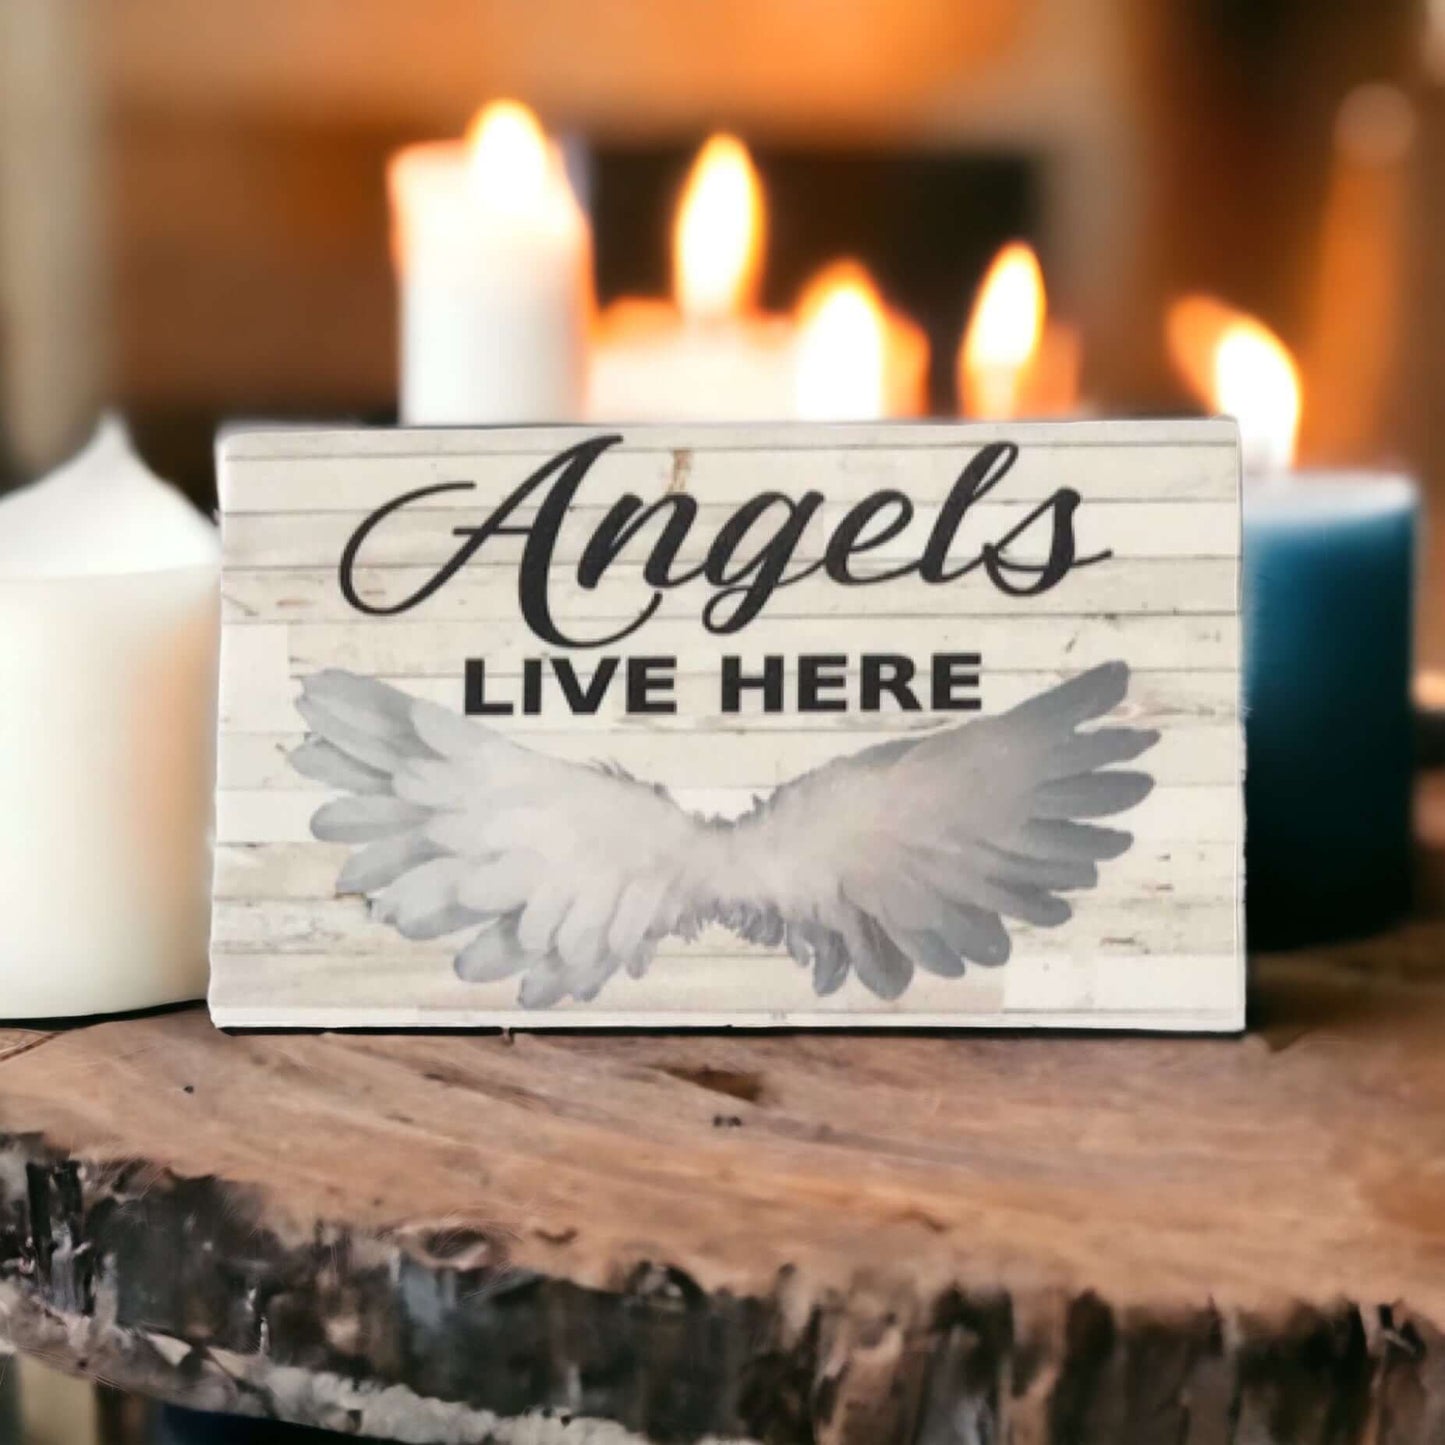 Angels Live Here Rustic White Sign - The Renmy Store Homewares & Gifts 